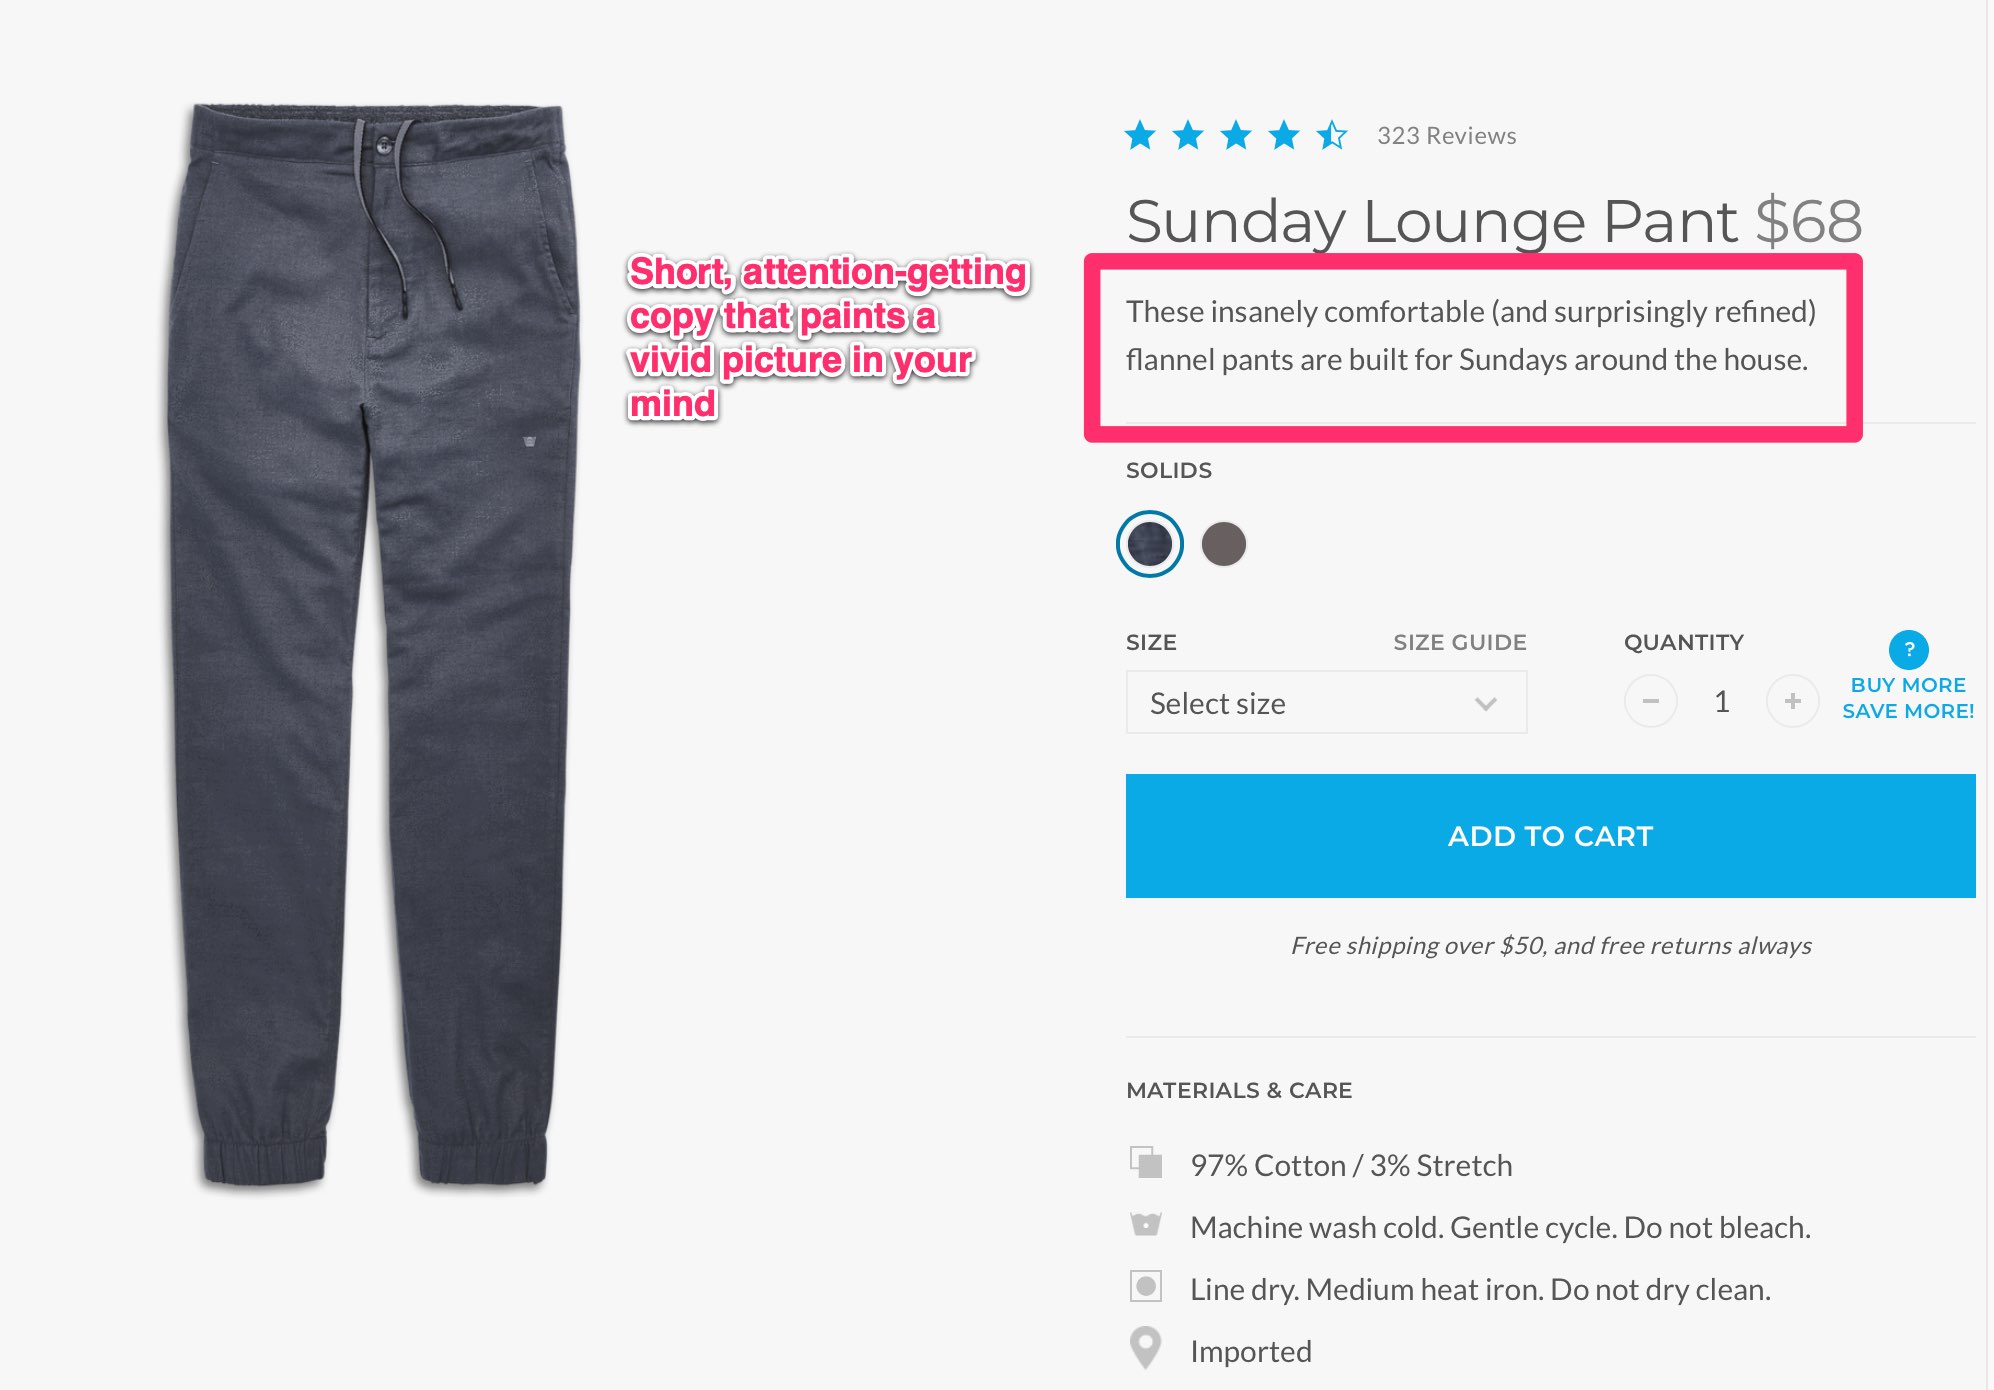 20 Reasons Why Ecommerce Sites Need Unique Product Descriptions